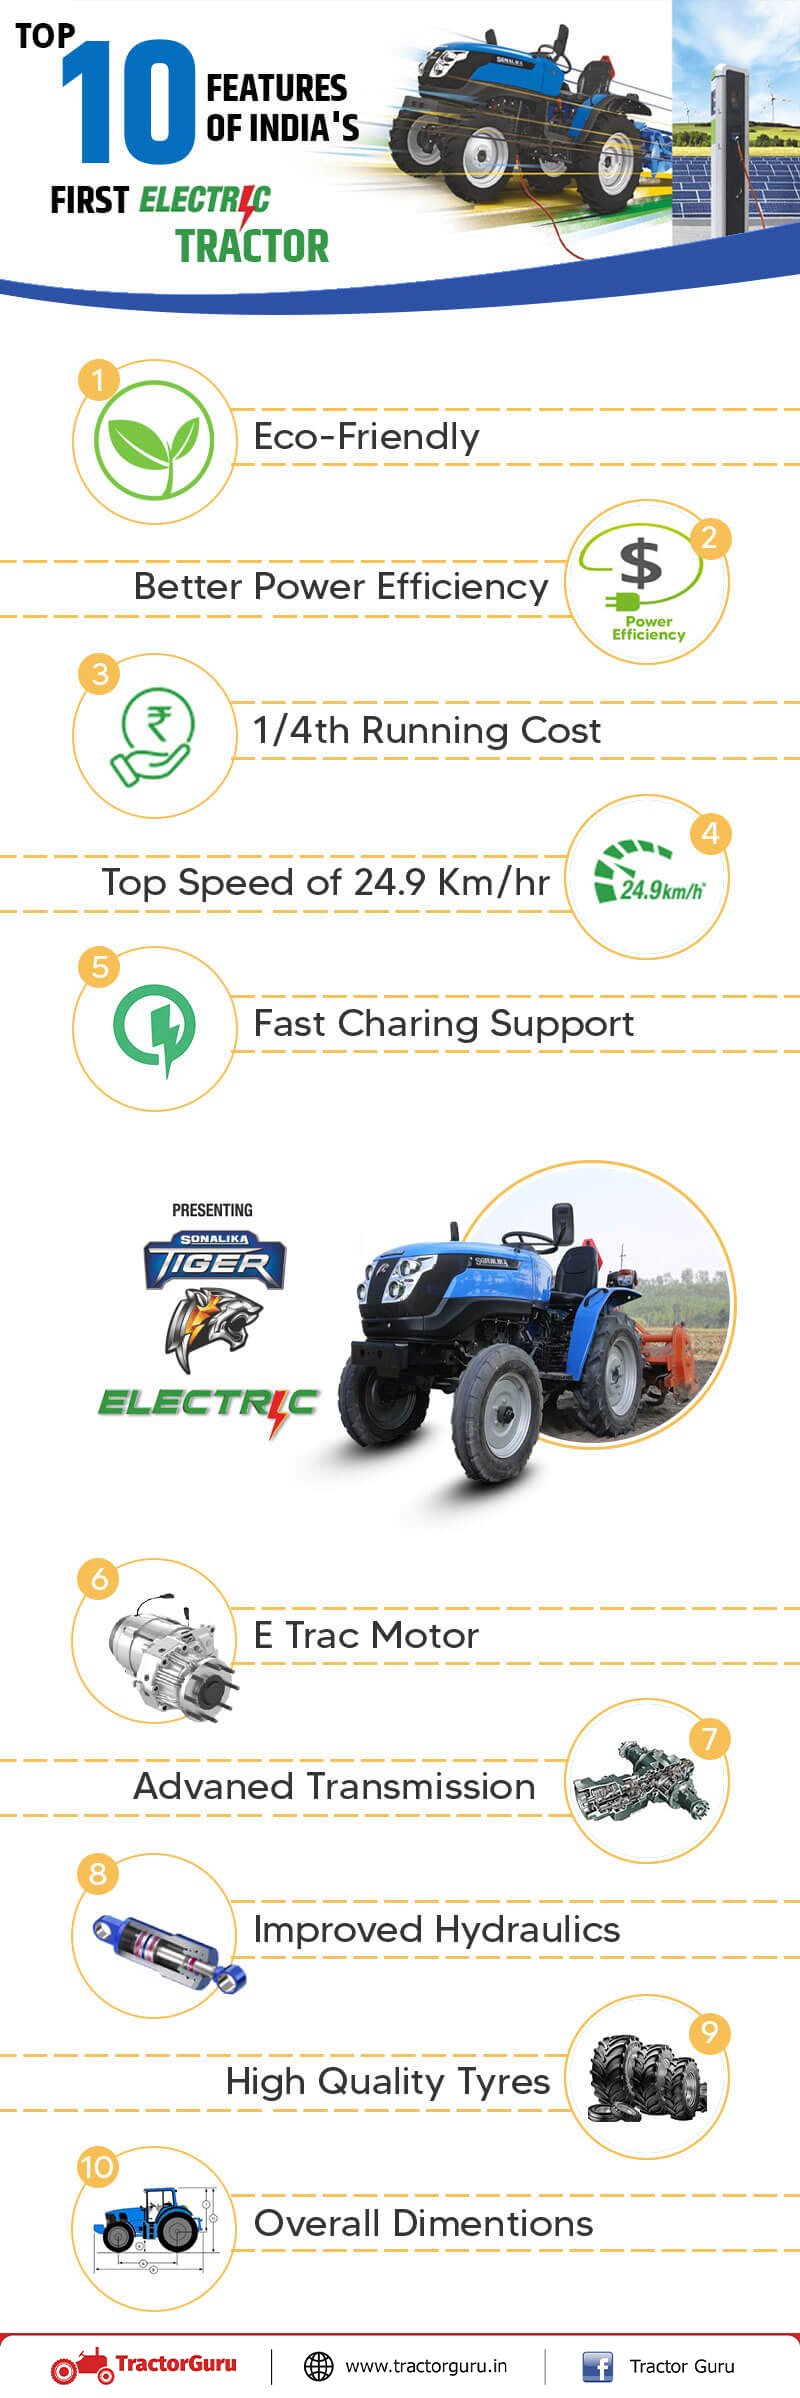 Top 10 Features of Sonalika Electric Tractor